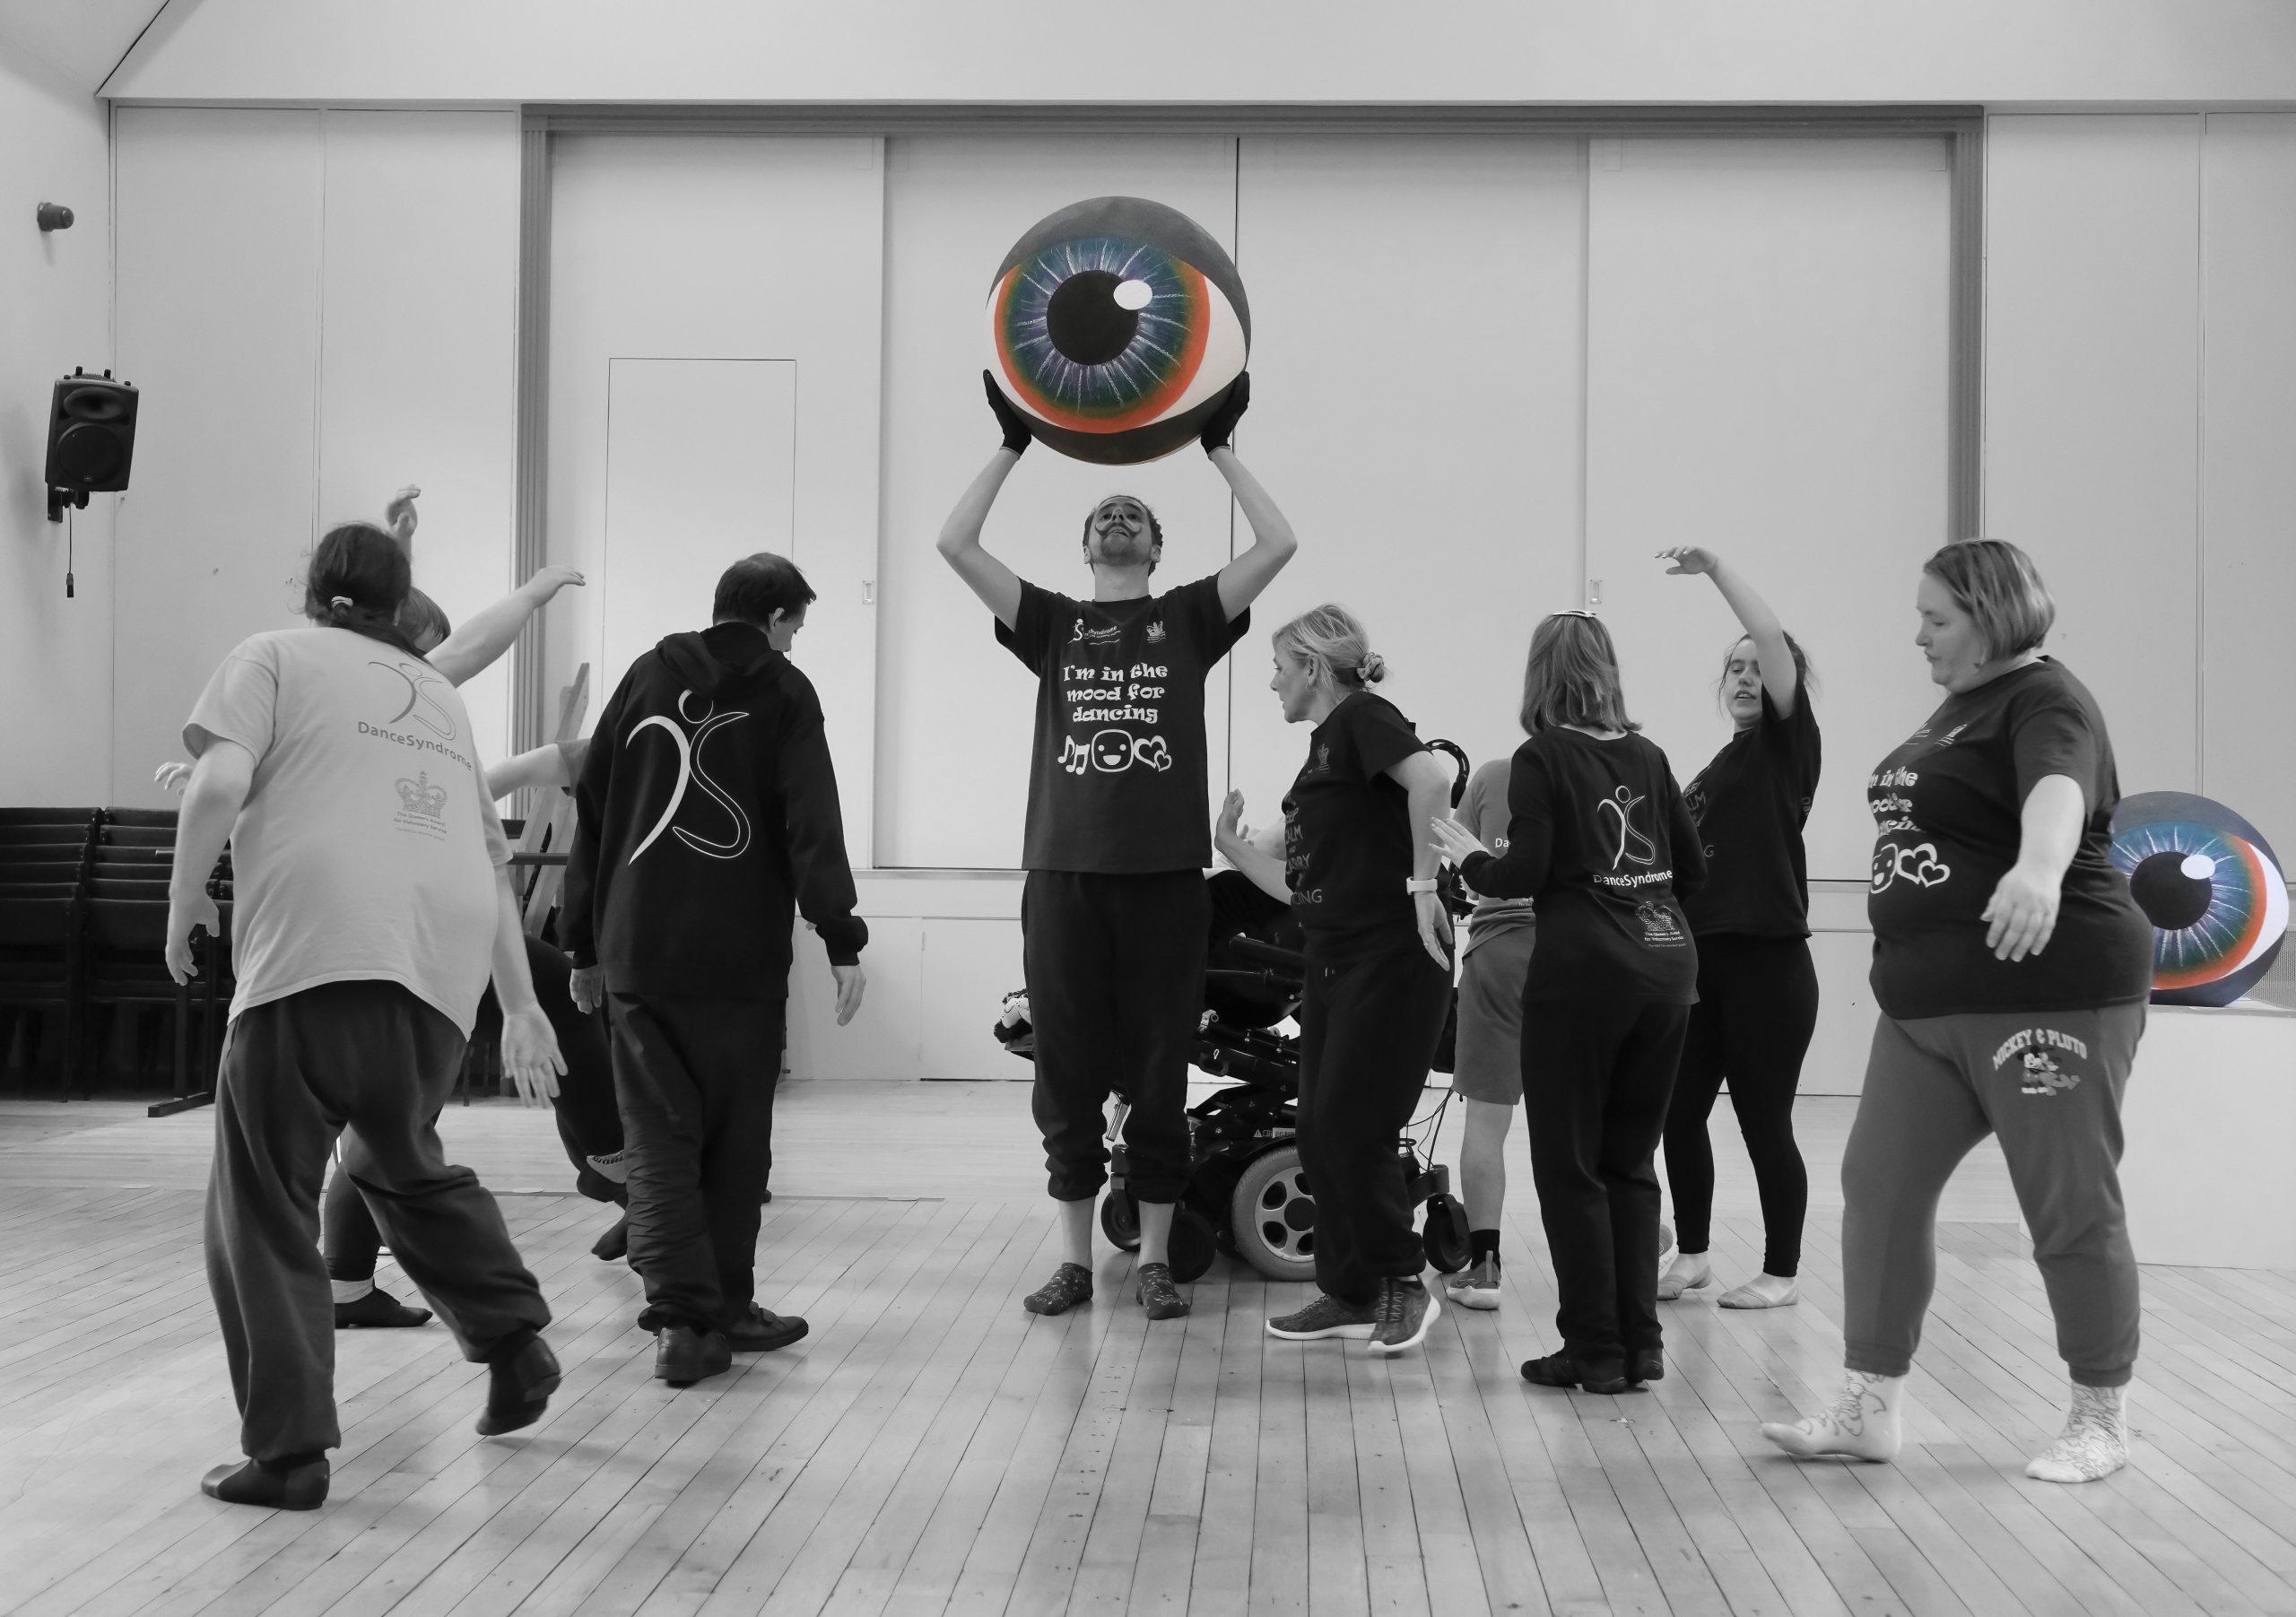 A photograph of the DanceSyndrome team rehearsing for the Edinburgh Fringe performances. They are dancing around a giant eye.